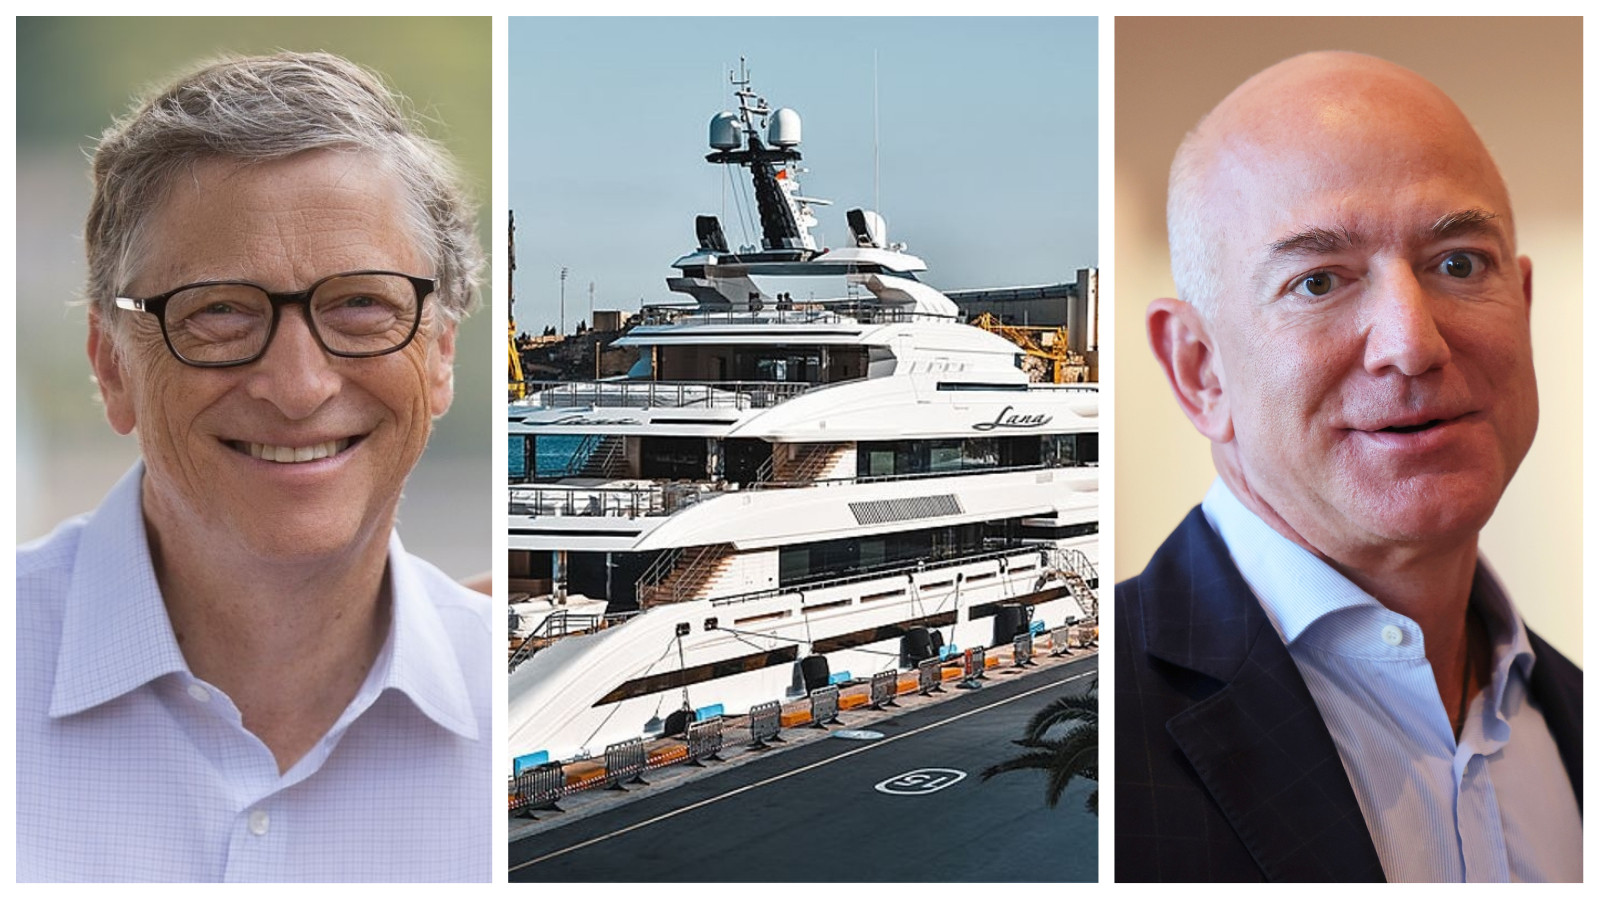 Bill Gates Invited Jeff Bezos to Superyacht B-day Party—Angers Twitter